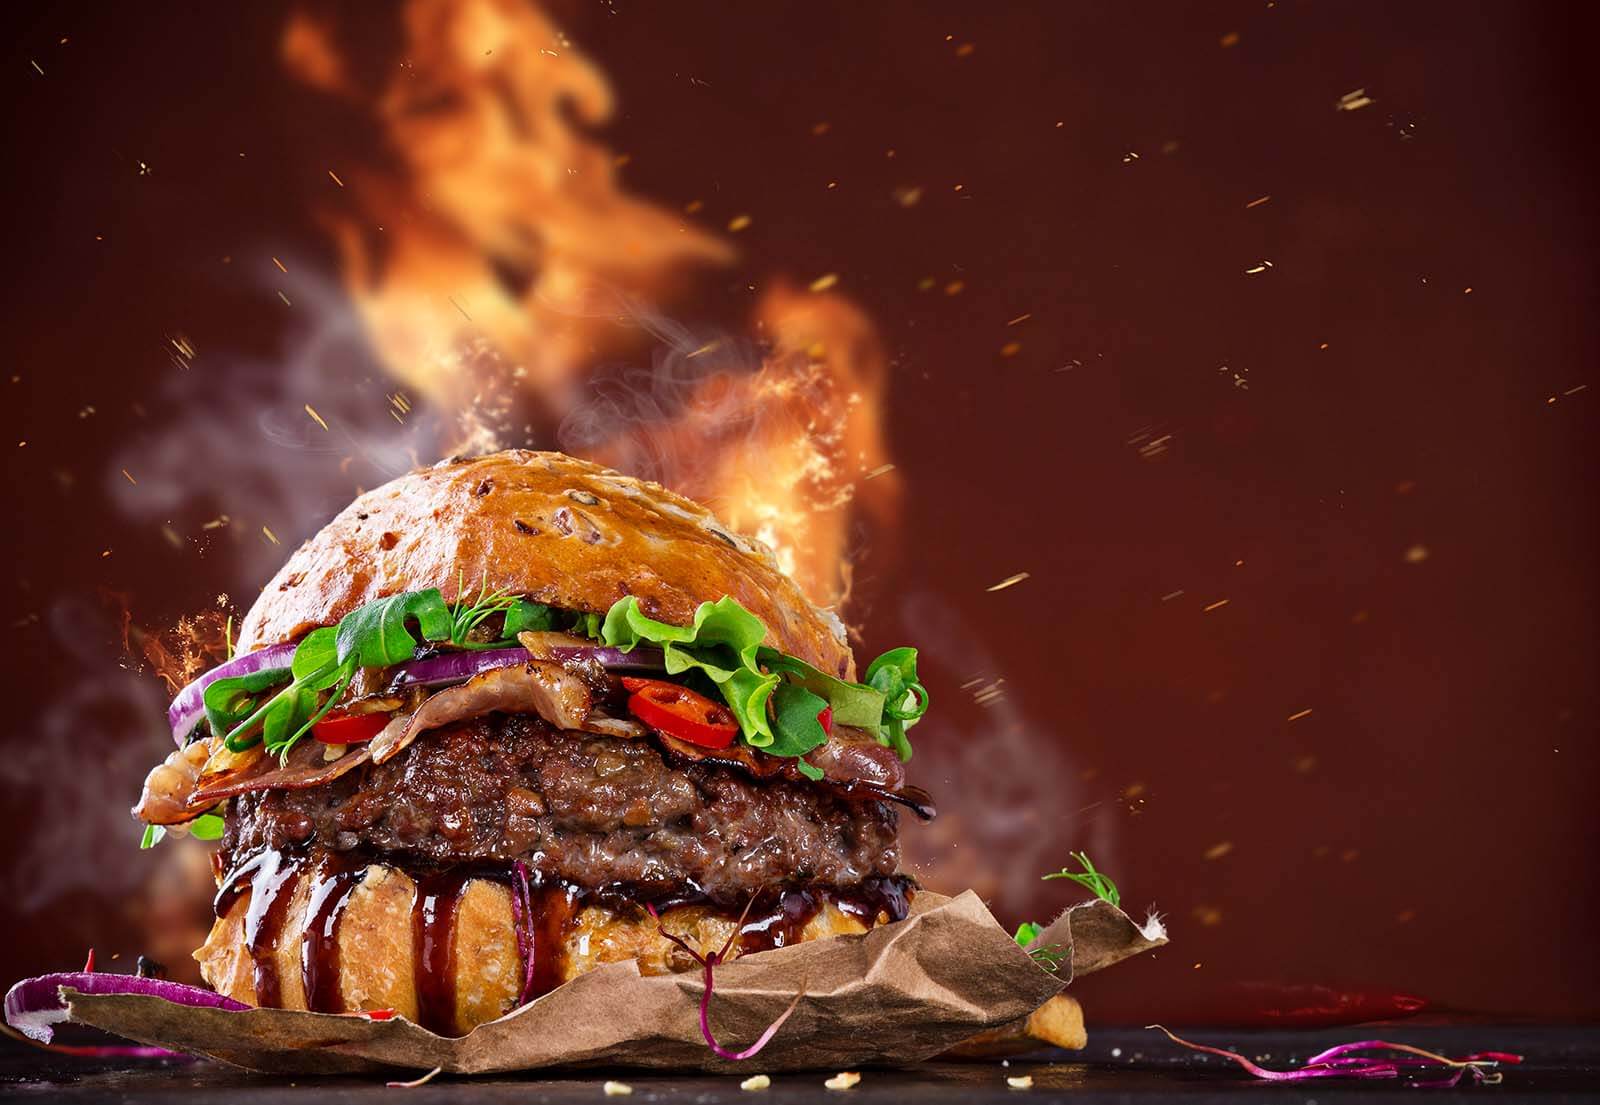 Delicious hamburger with fire flames - The Butcher Shop, Inc.